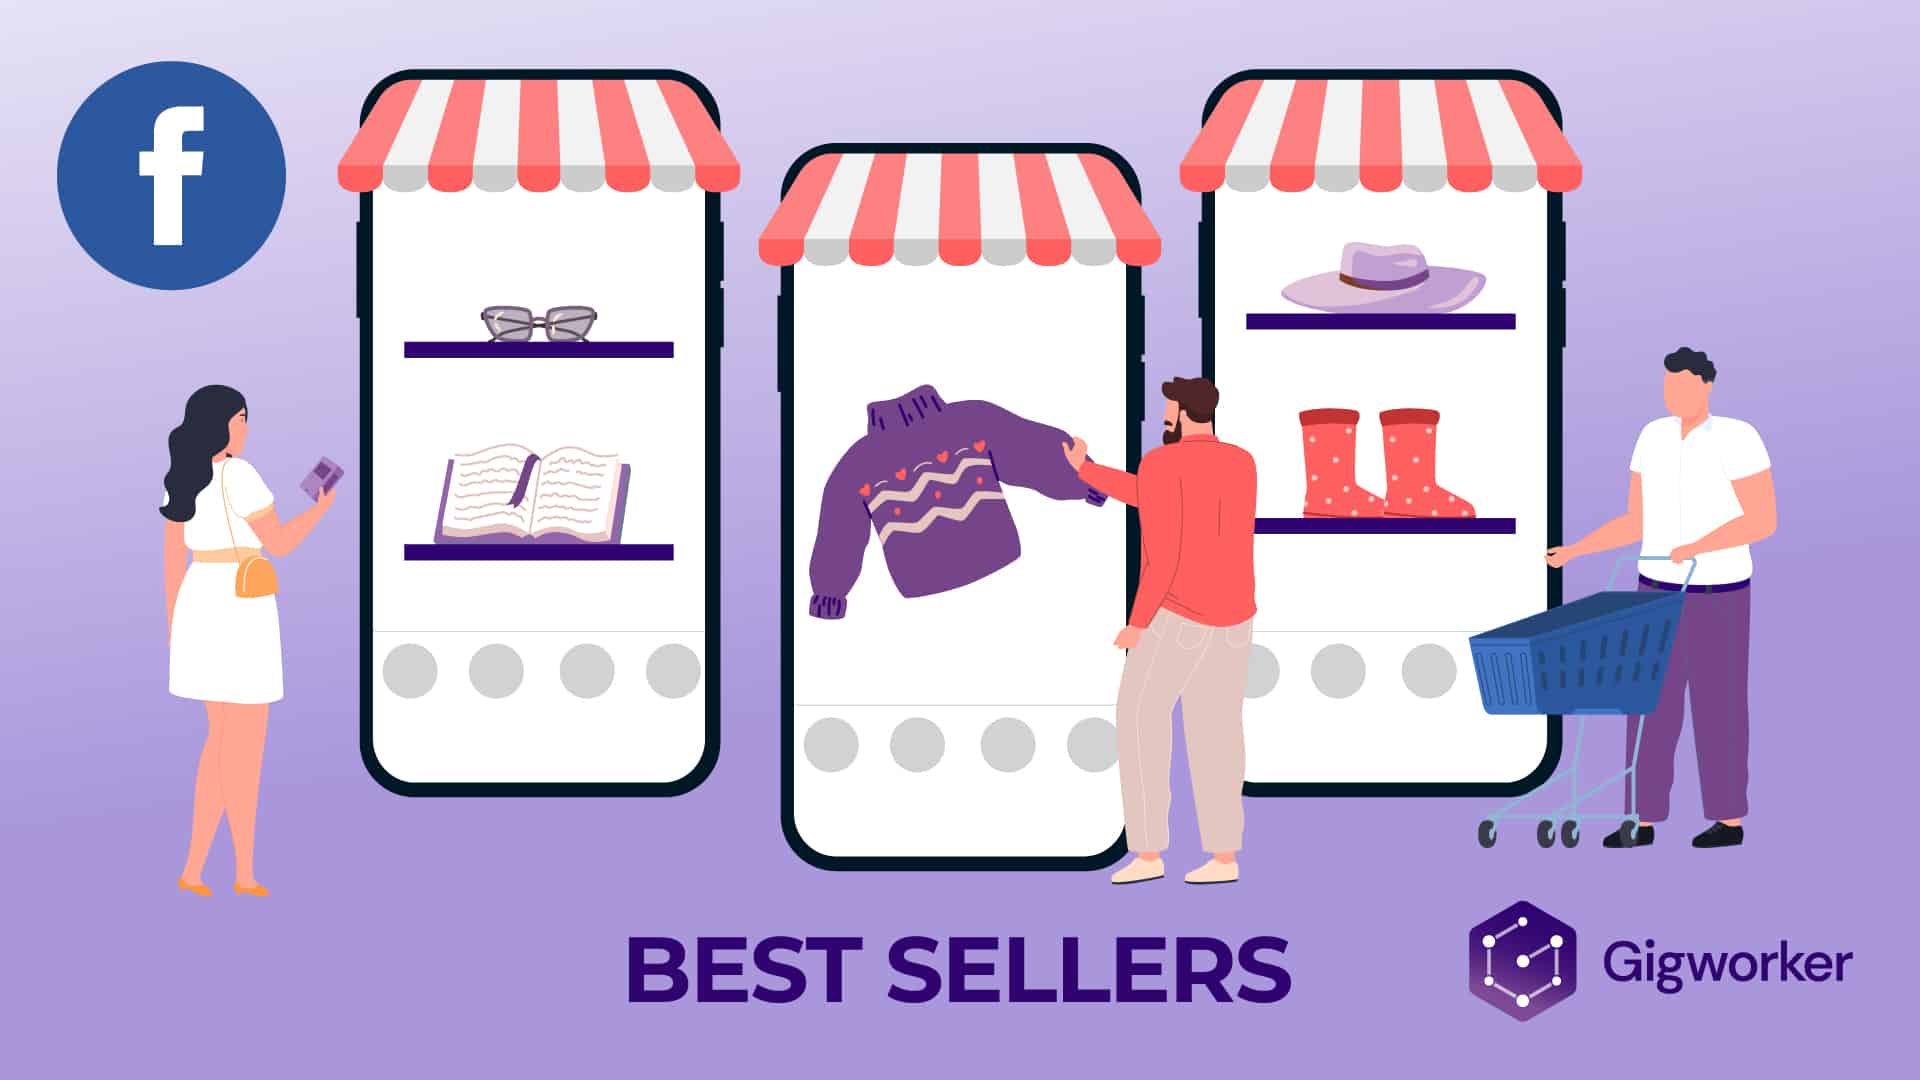 vector graphic showing an illustration of phones depicting facebook marketplace with items that are best selling items on facebook marketplace